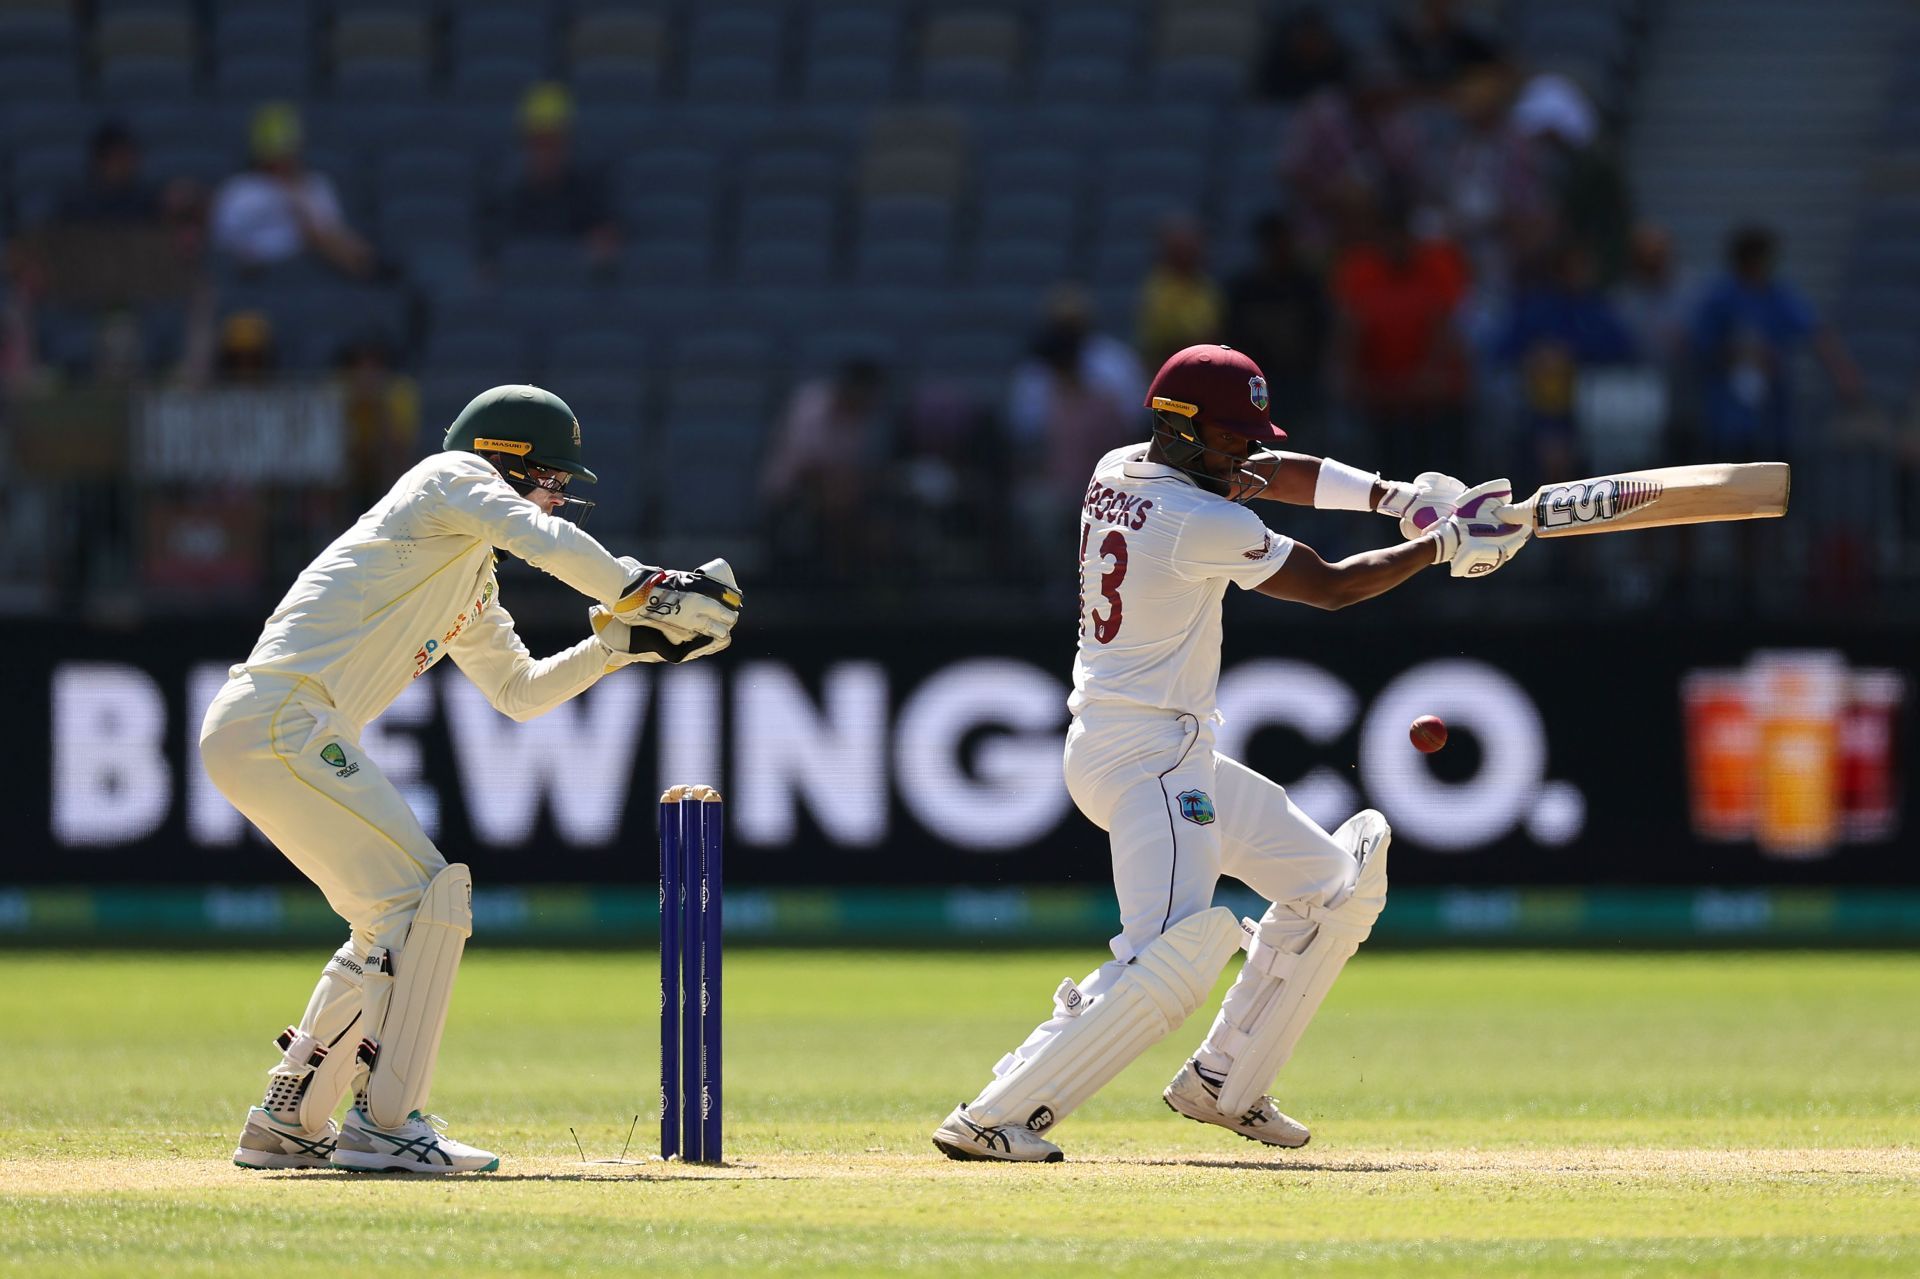 Australia v West Indies - First Test: Day 3 (Image: Getty)